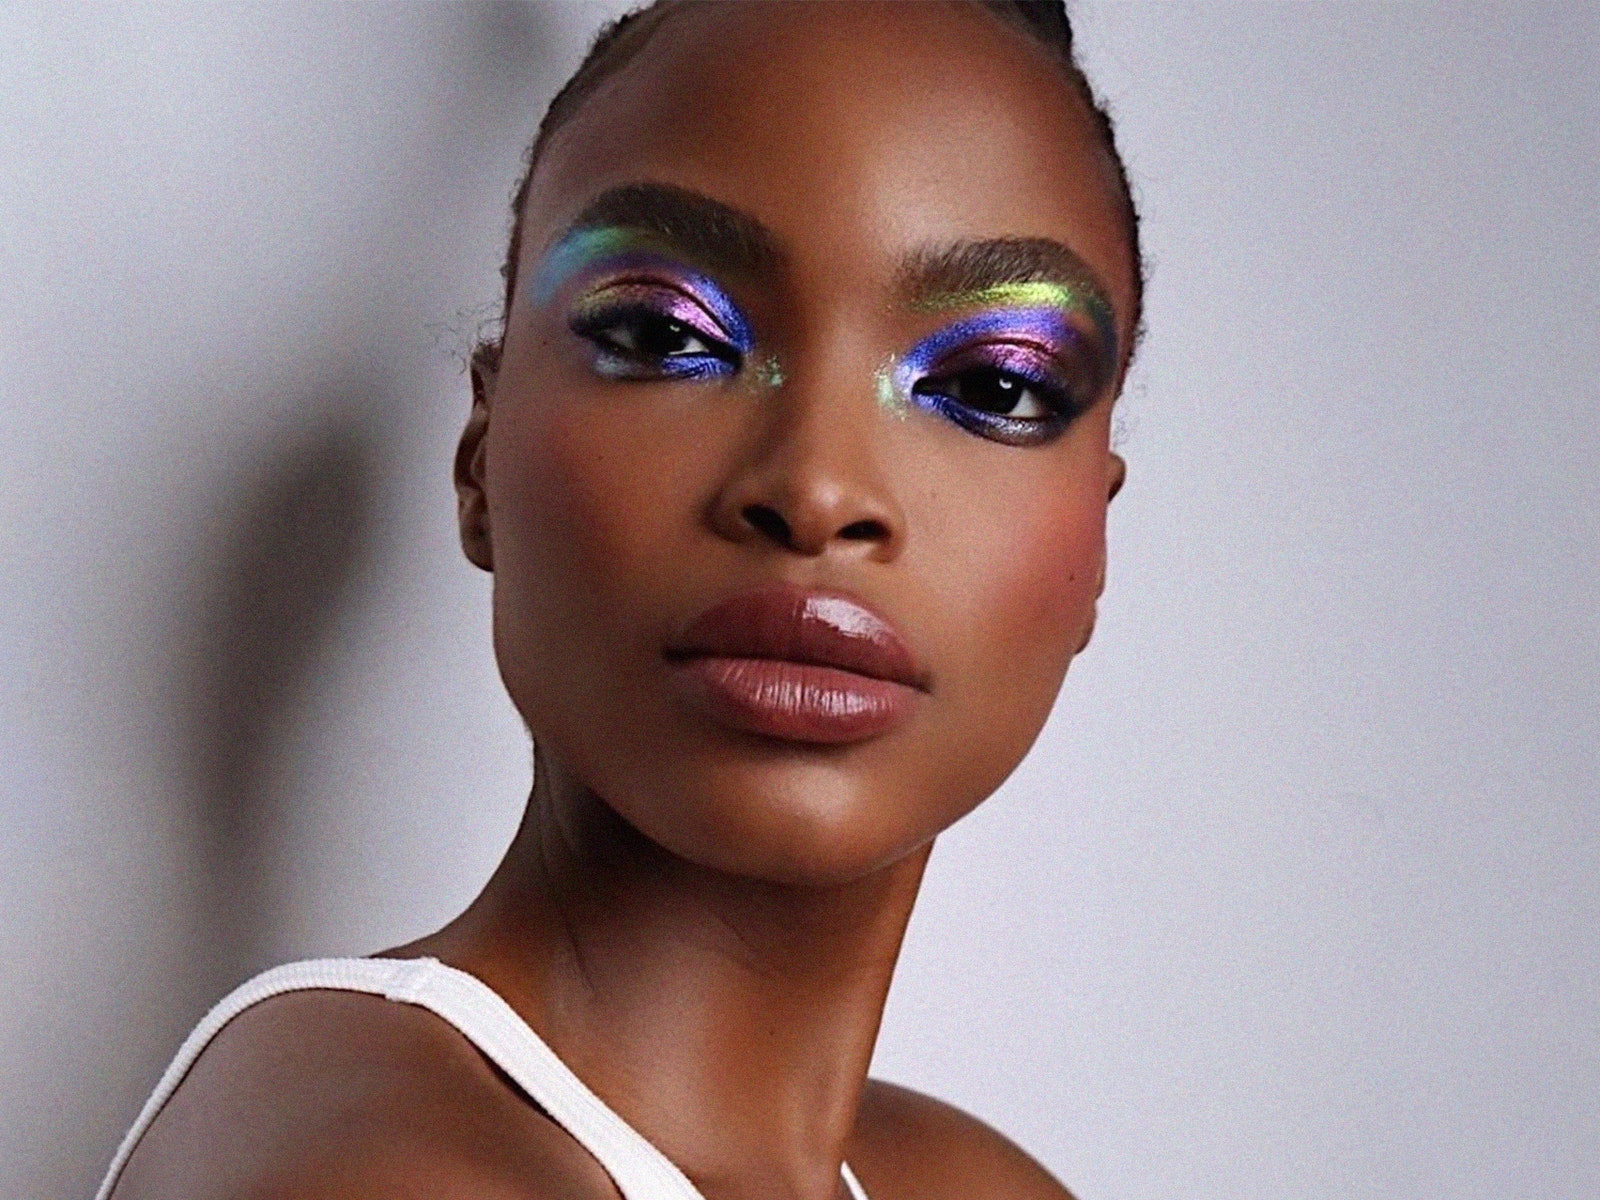 37 New Year's makeup ideas to ring in 2024 in style